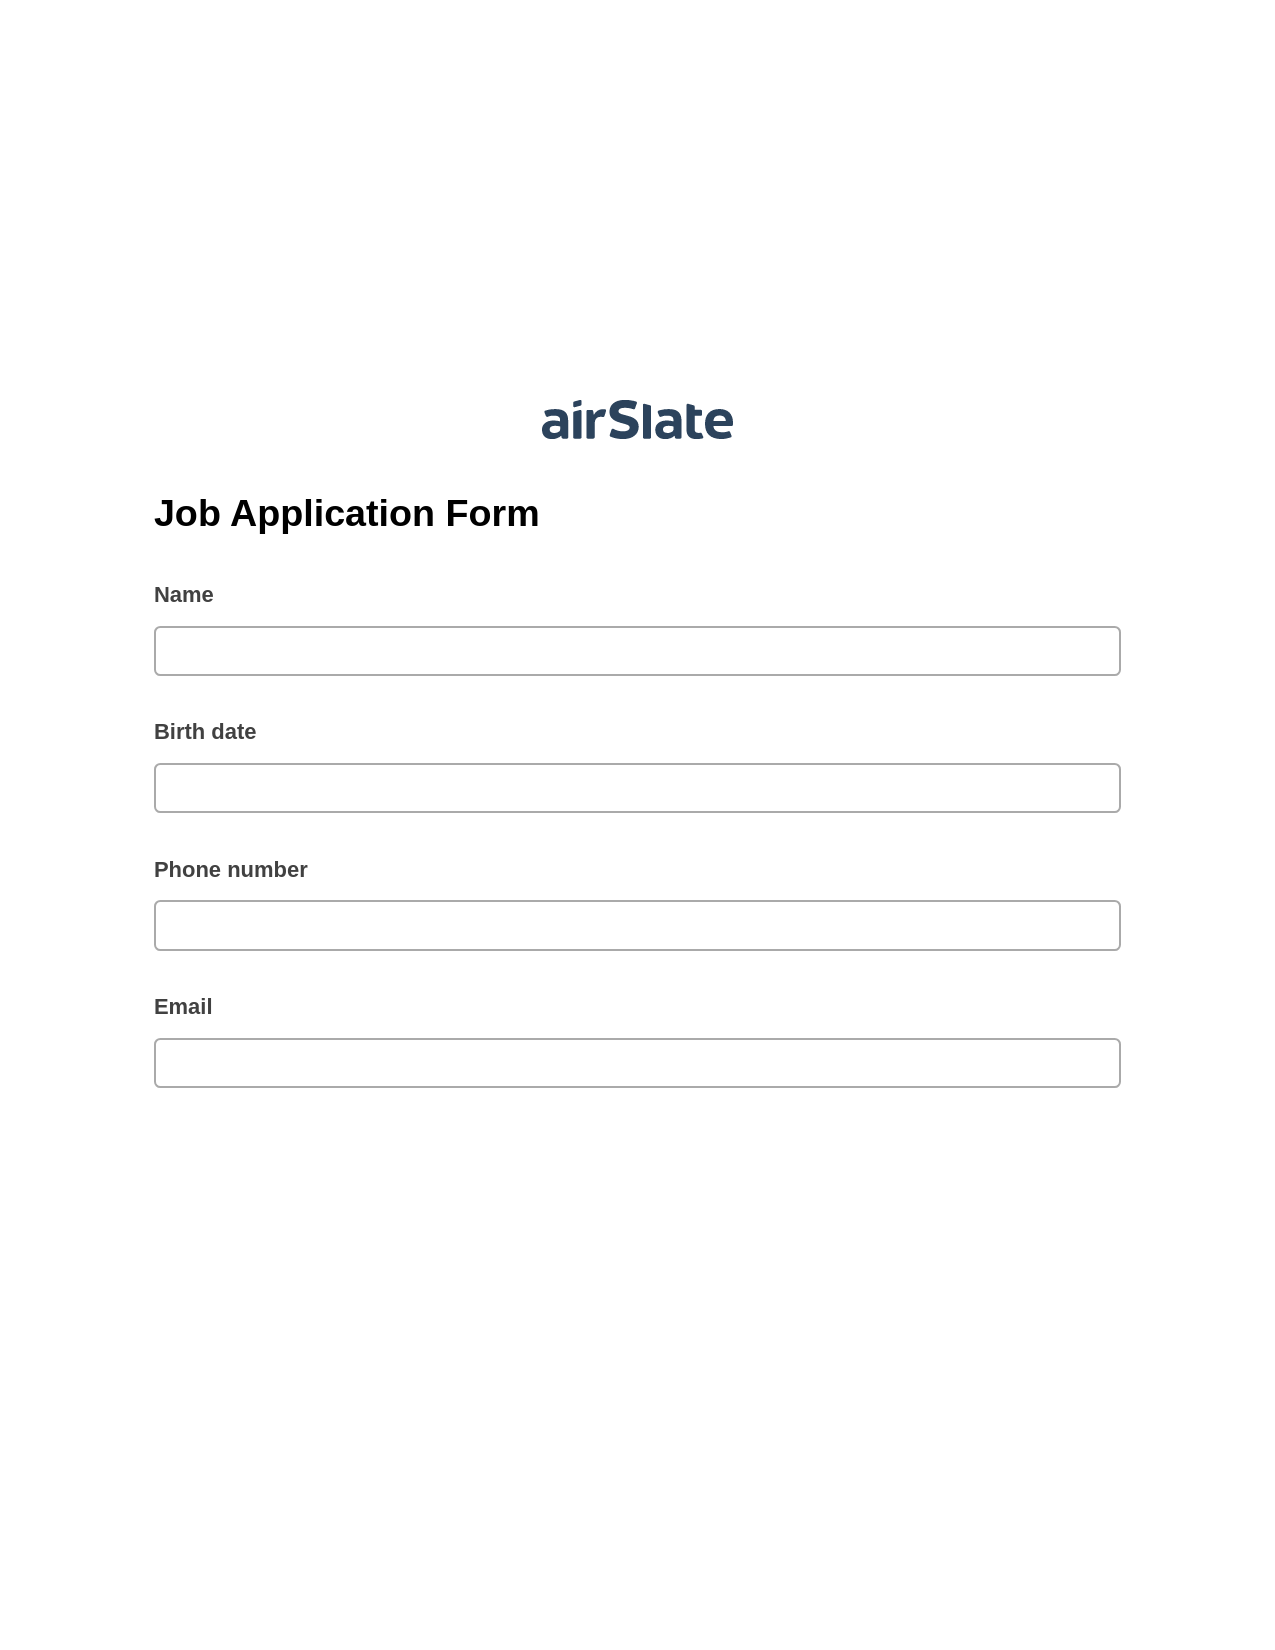 Job Application Form Pre-fill from MySQL Dropdown Options Bot, Create NetSuite Records Bot, Export to Formstack Documents Bot